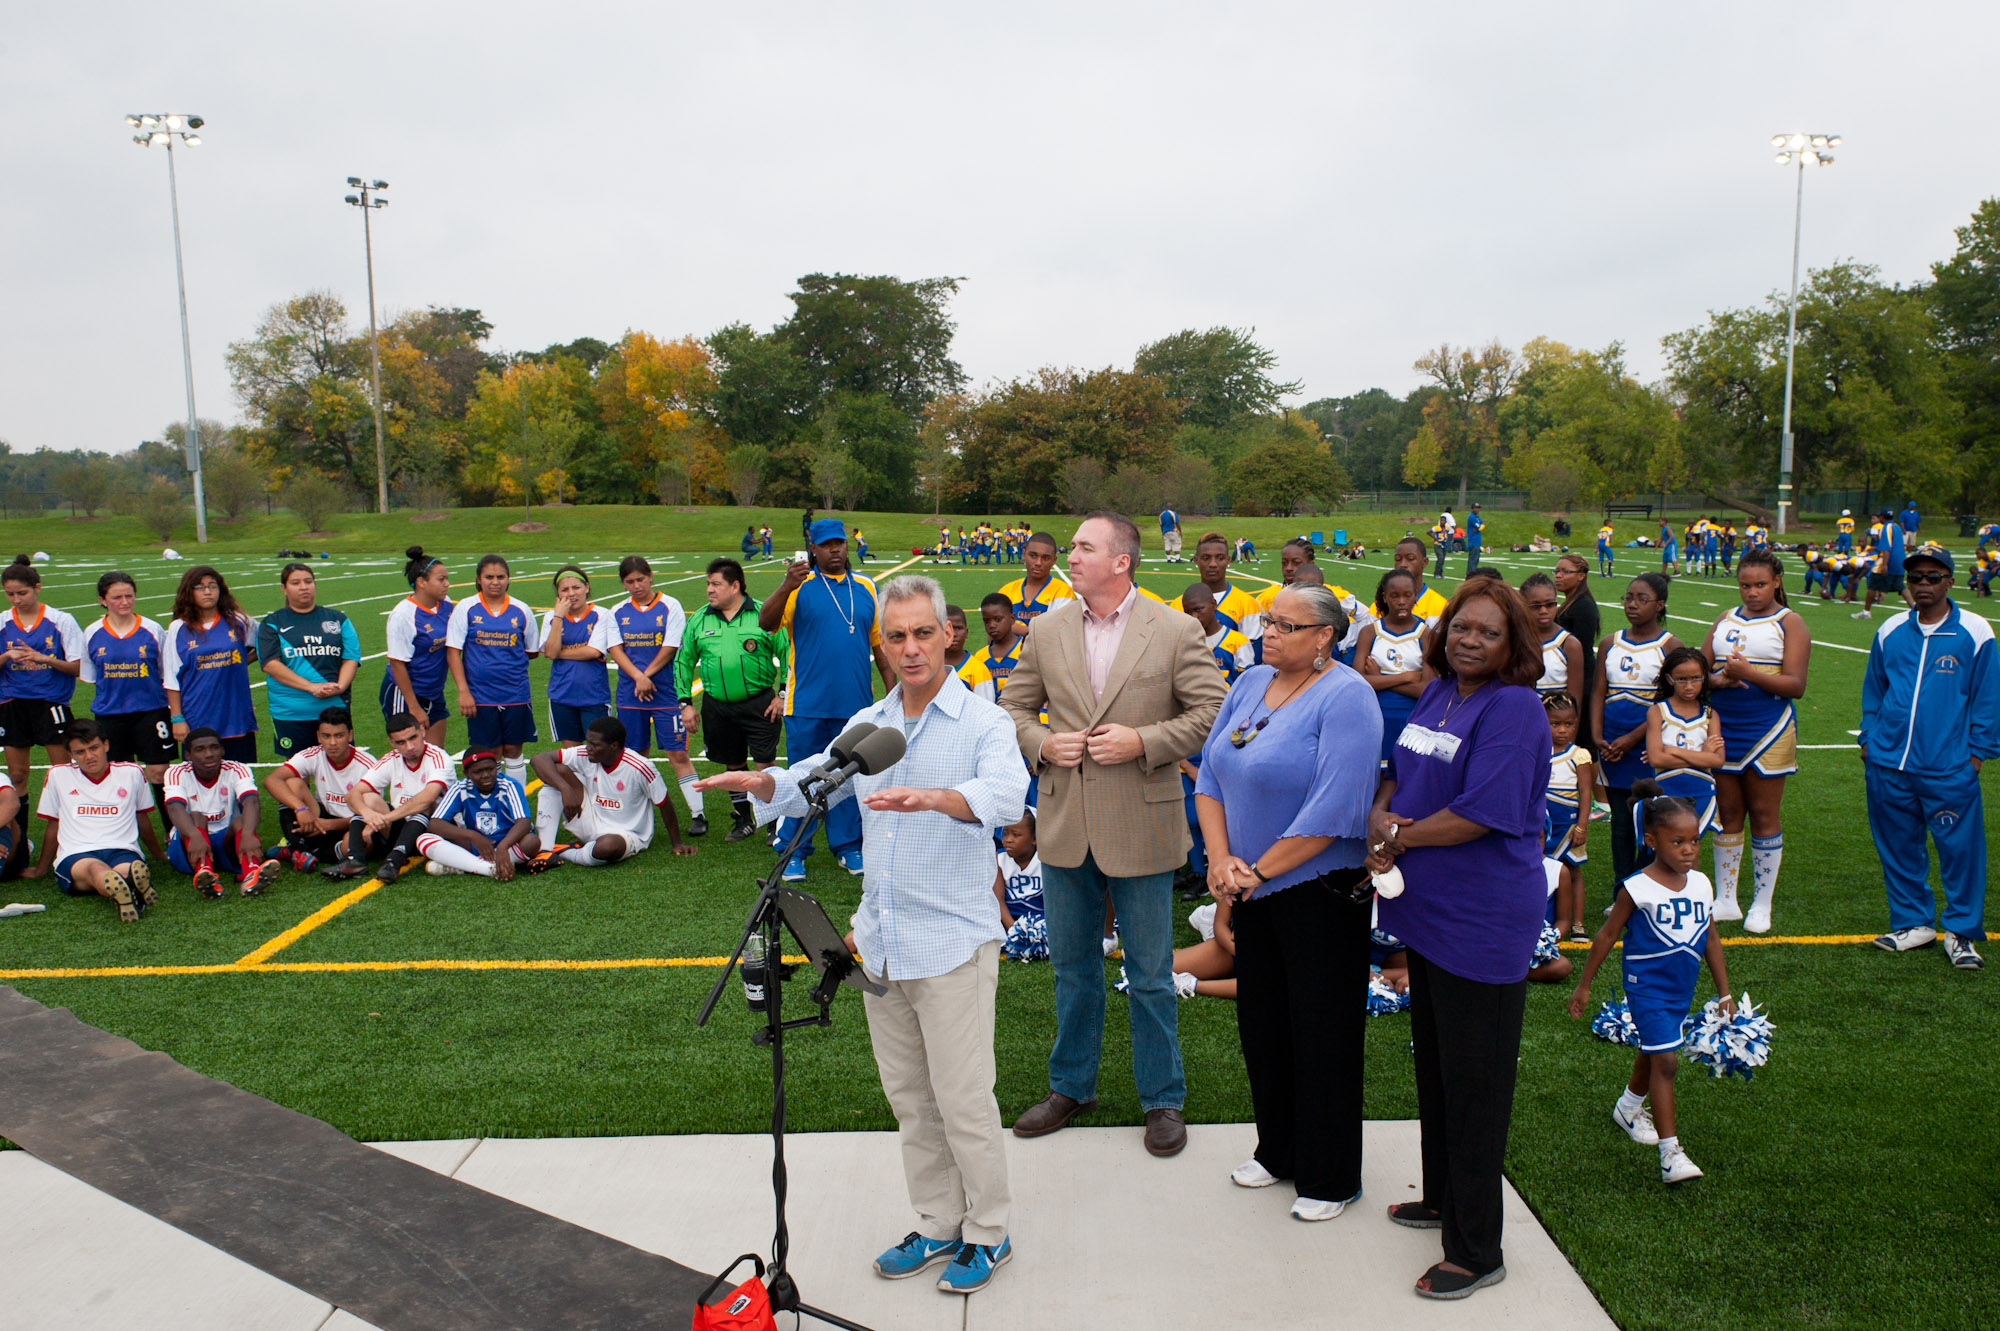 Mayor Emanuel joined Alderman Deborah Graham, Chicago Park District Superintendent Michael Kelly and members of the Austin community today to take part in a ribbon cutting at the site of a new artificial turf field at Columbus Park.